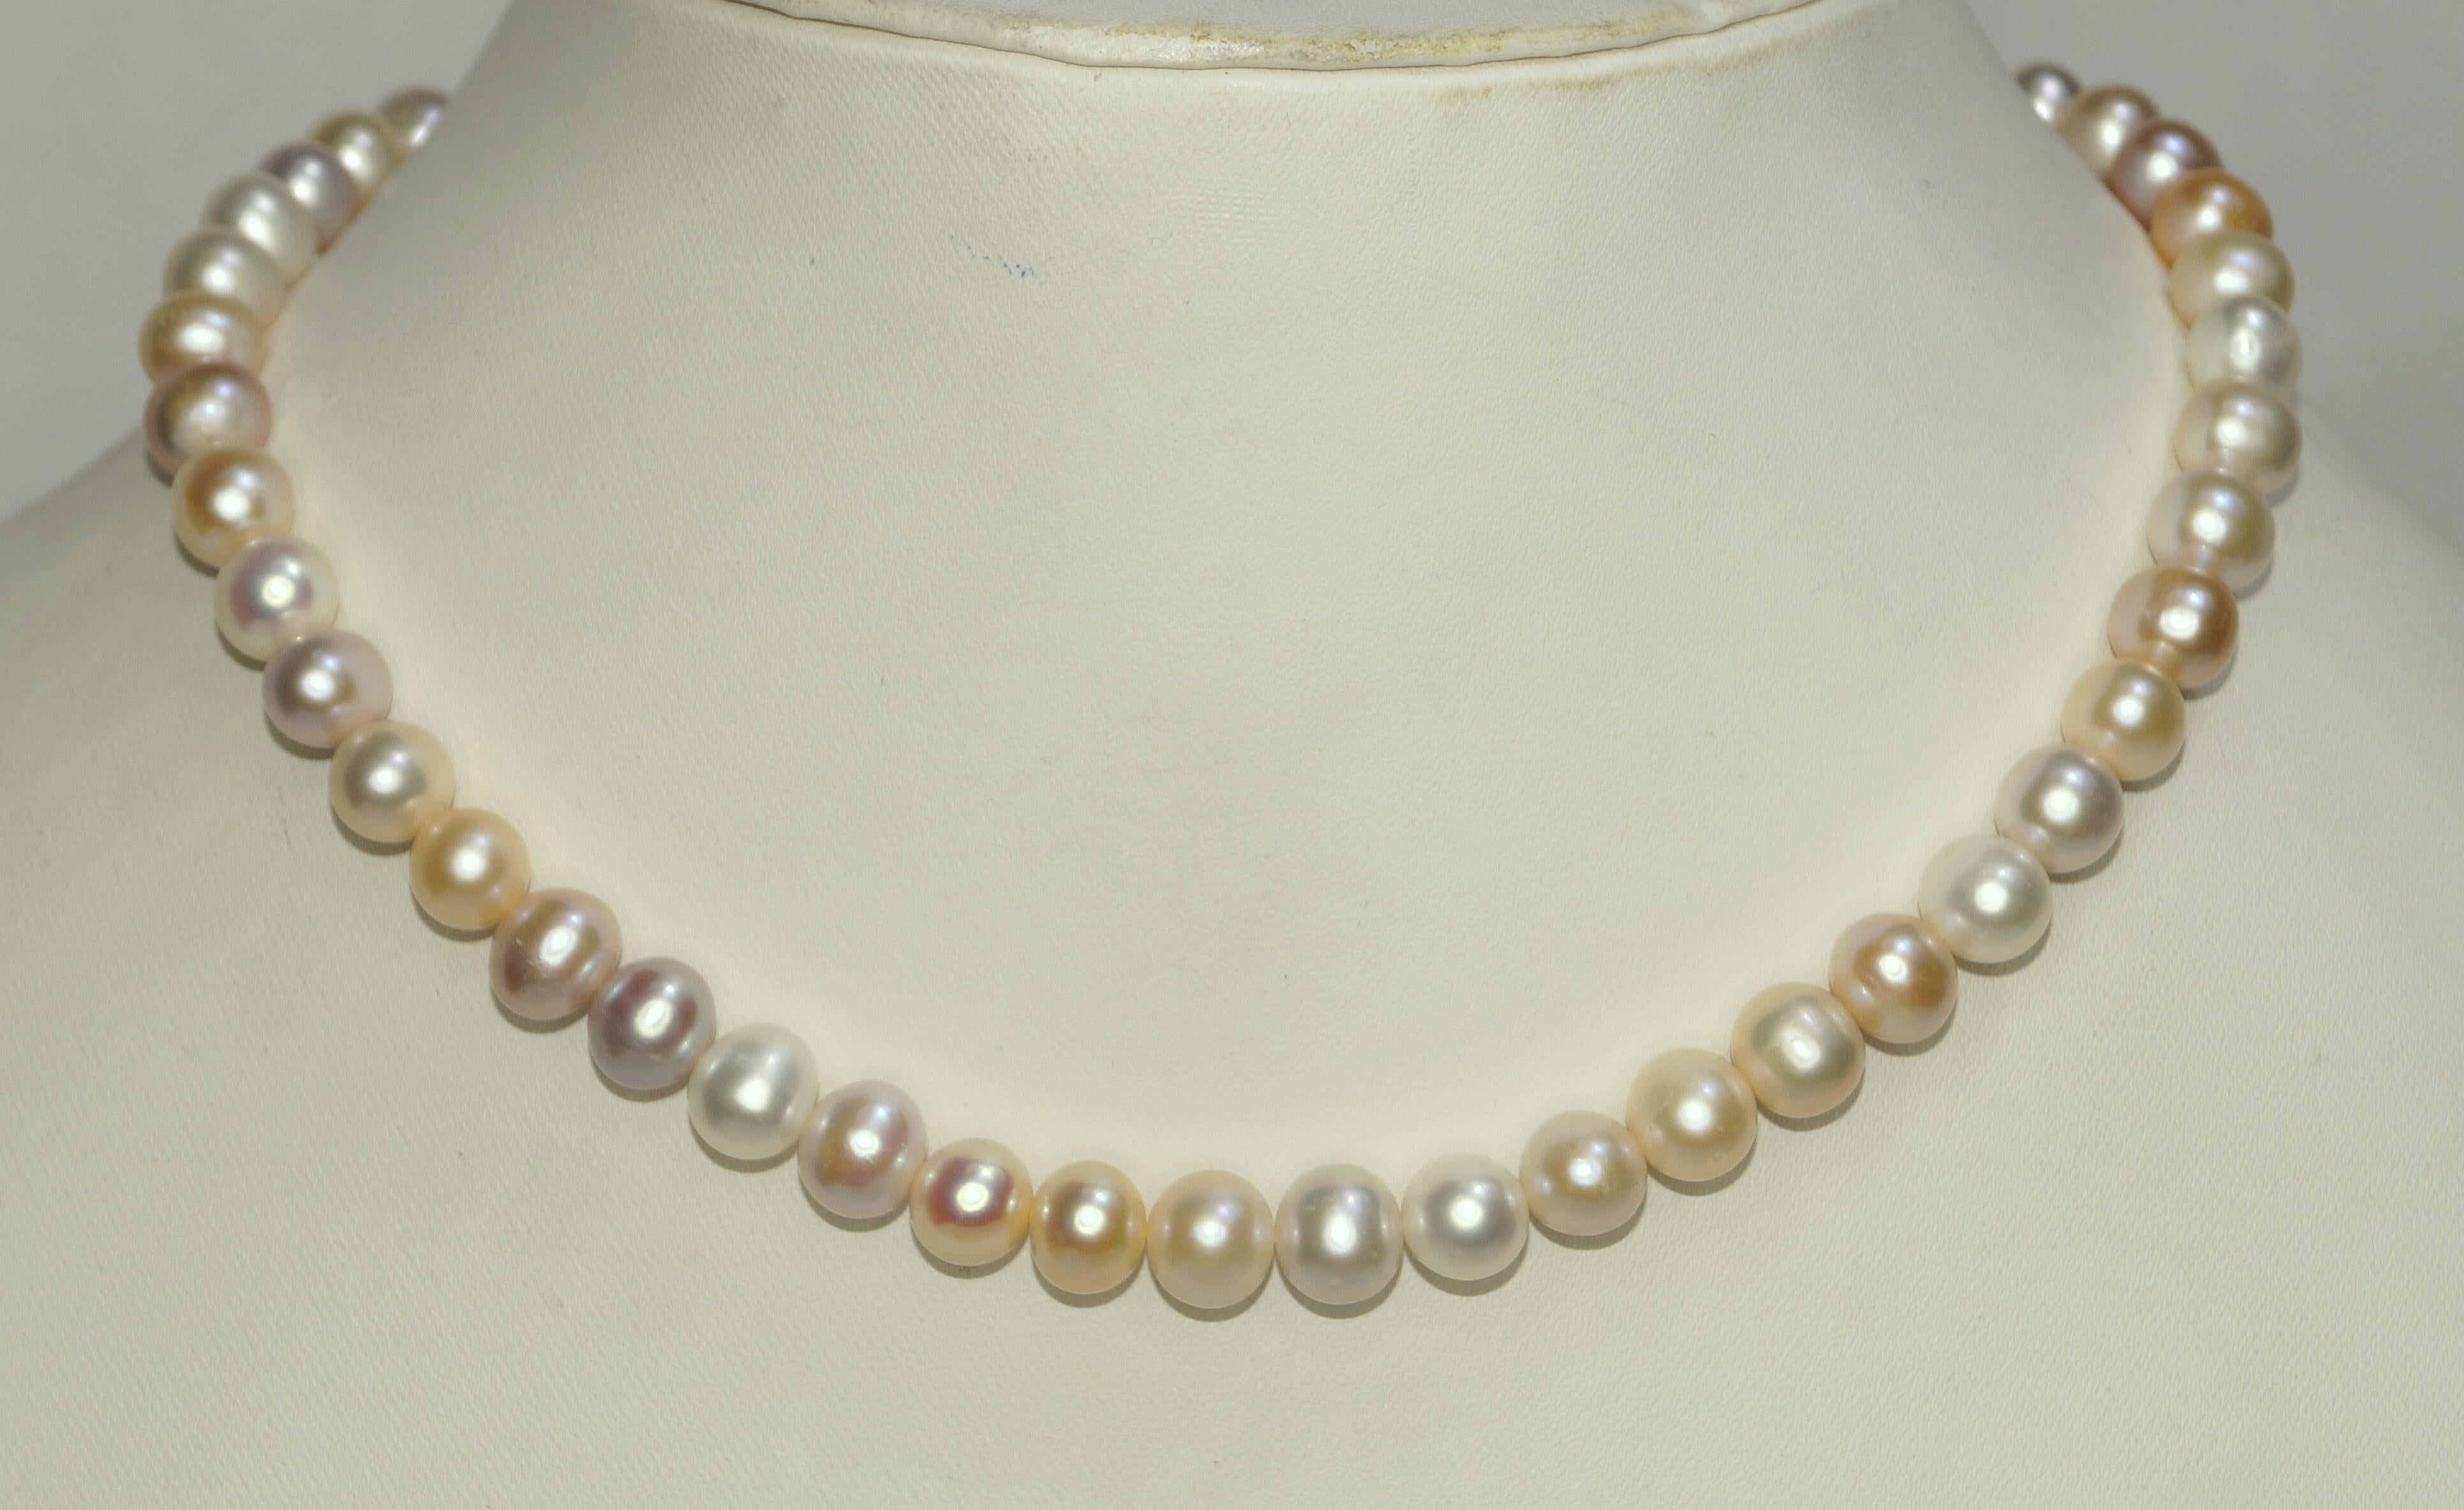 Details:
: 14k Yellow Gold Lock Freshwater pearl beads Necklace.

: Item no- KM44/500/9848

:Pearl Size: 8-9mm (Approx.)

:Necklace length: 17